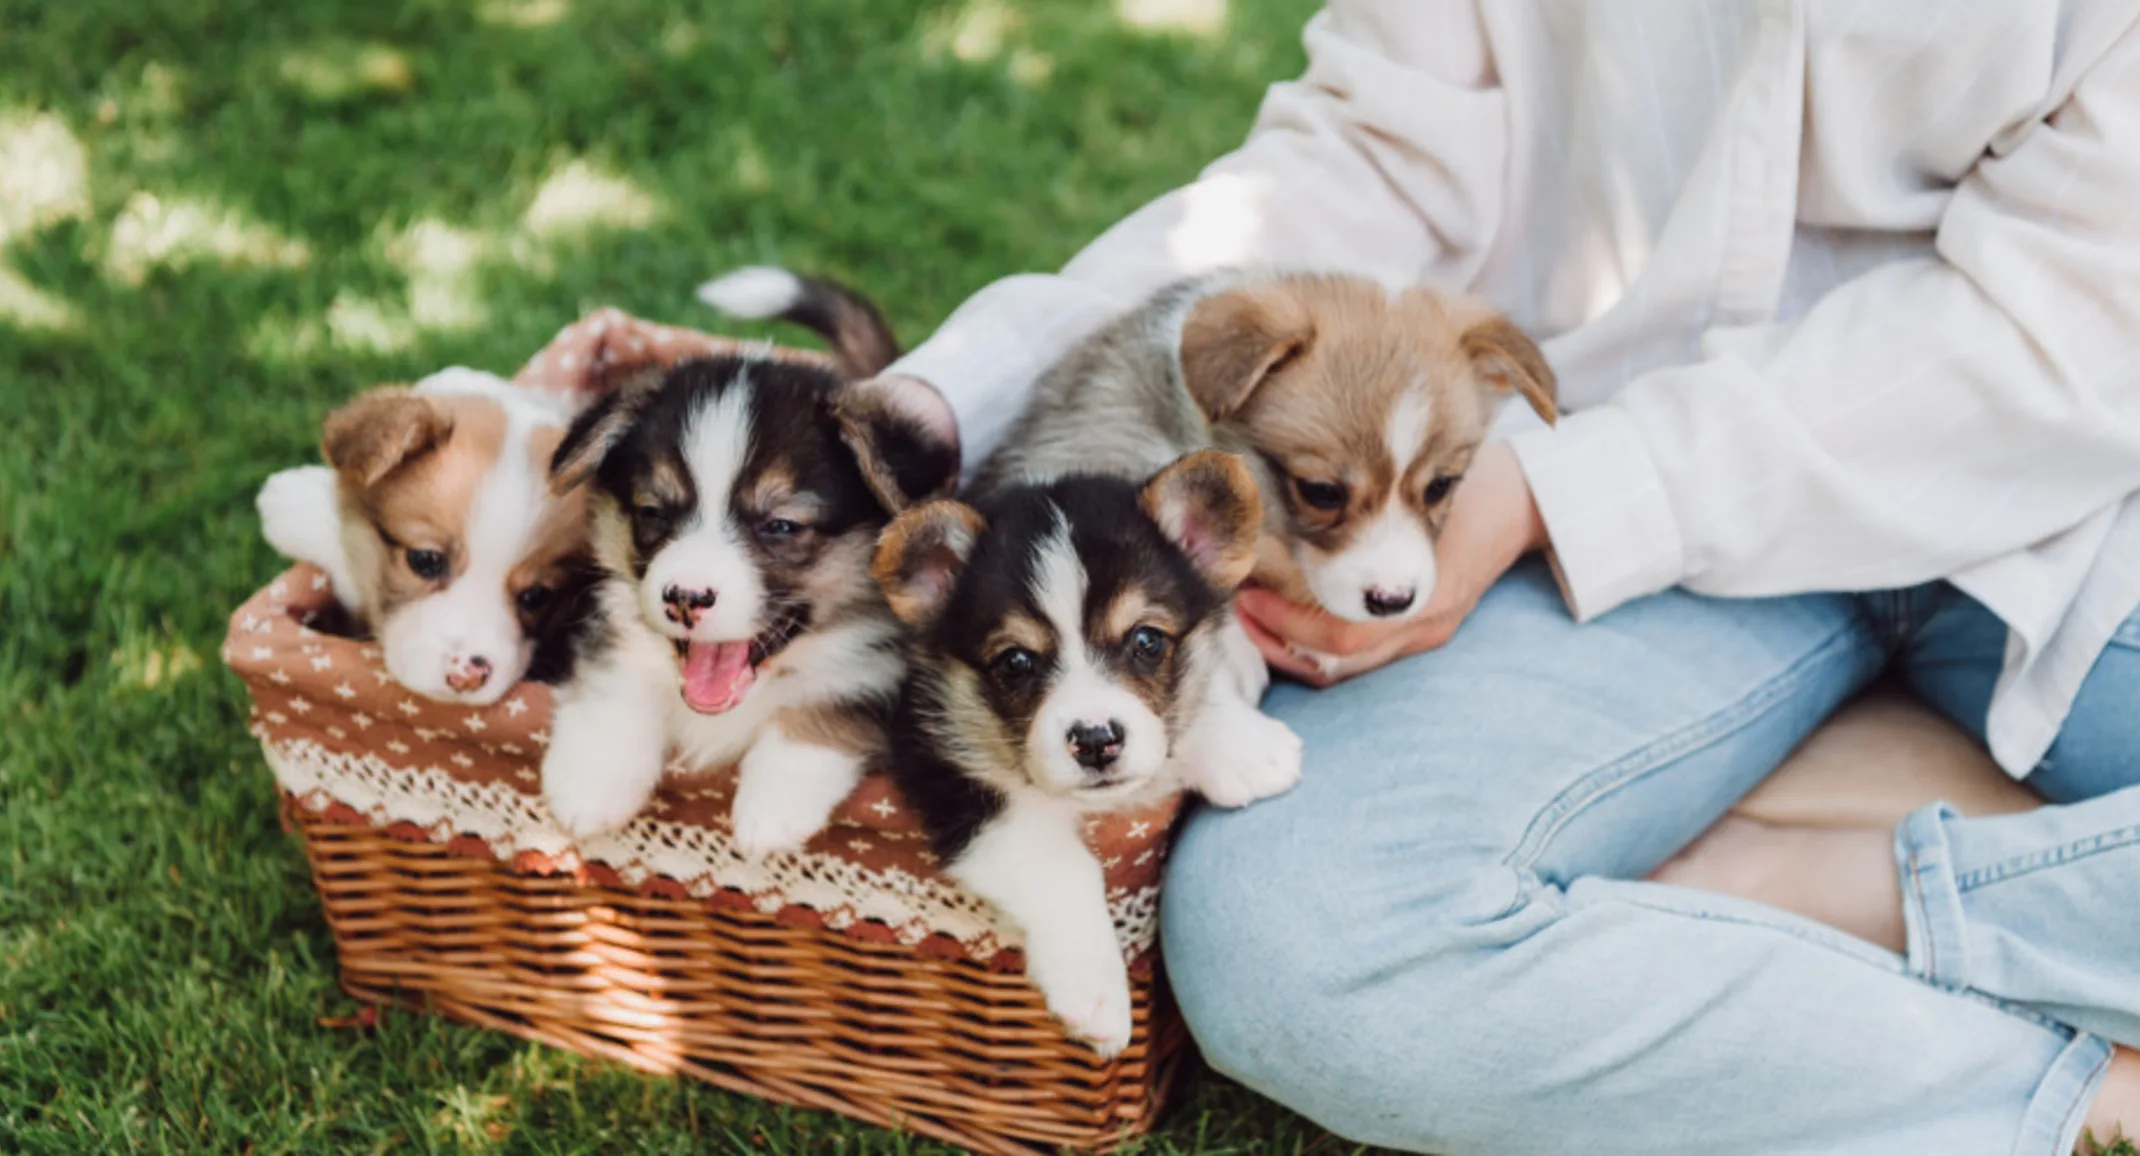 Girl Sitting with Puppies in a Basket